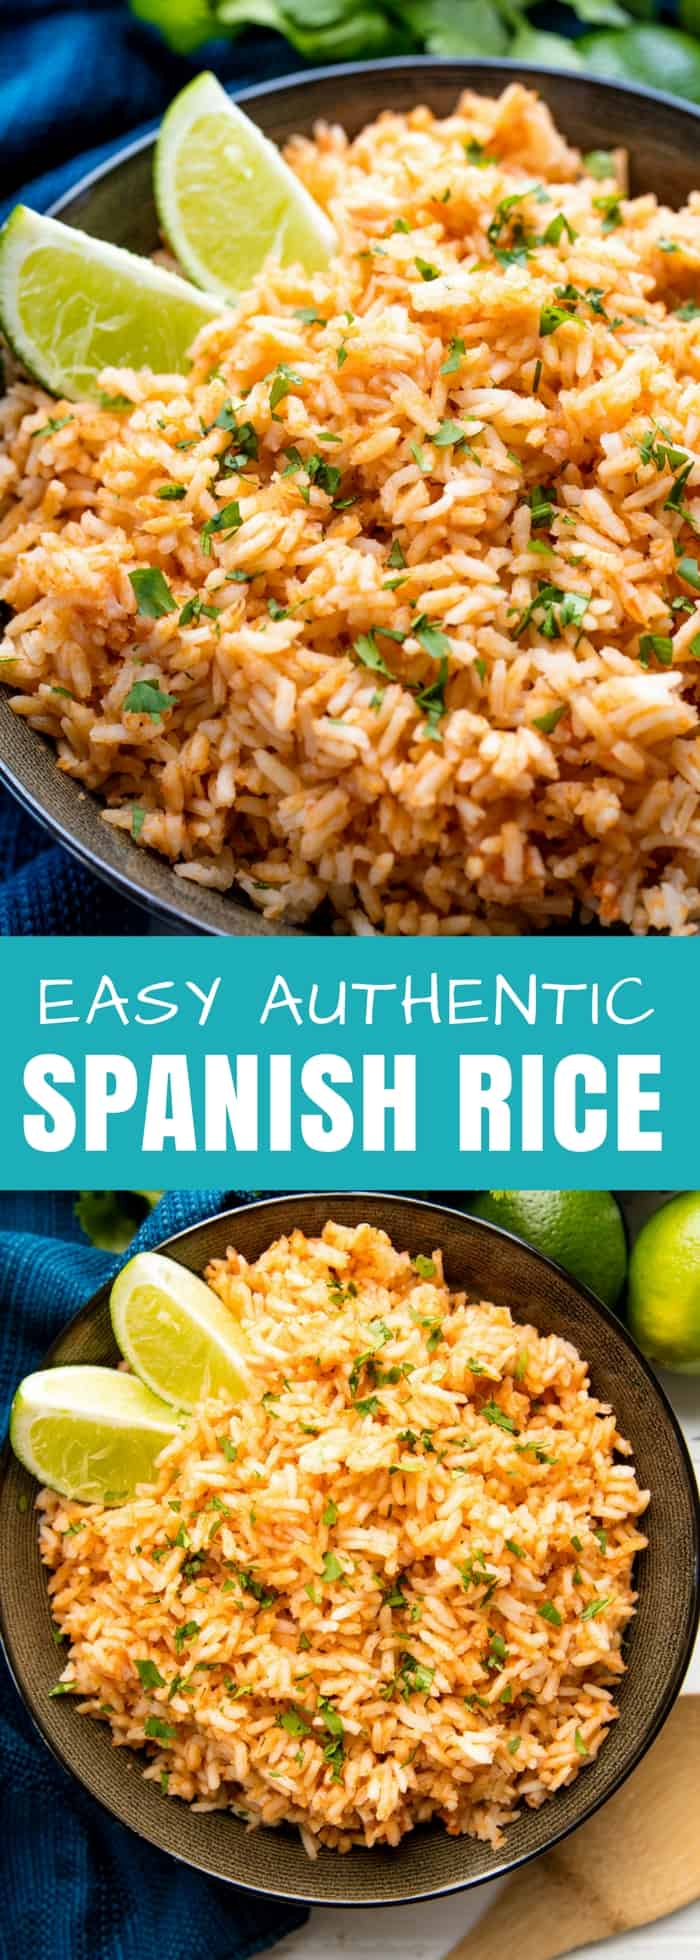 Spanish Rice is an easy and delicious side dish that goes well with any Mexican or Mexican-inspired meal. 